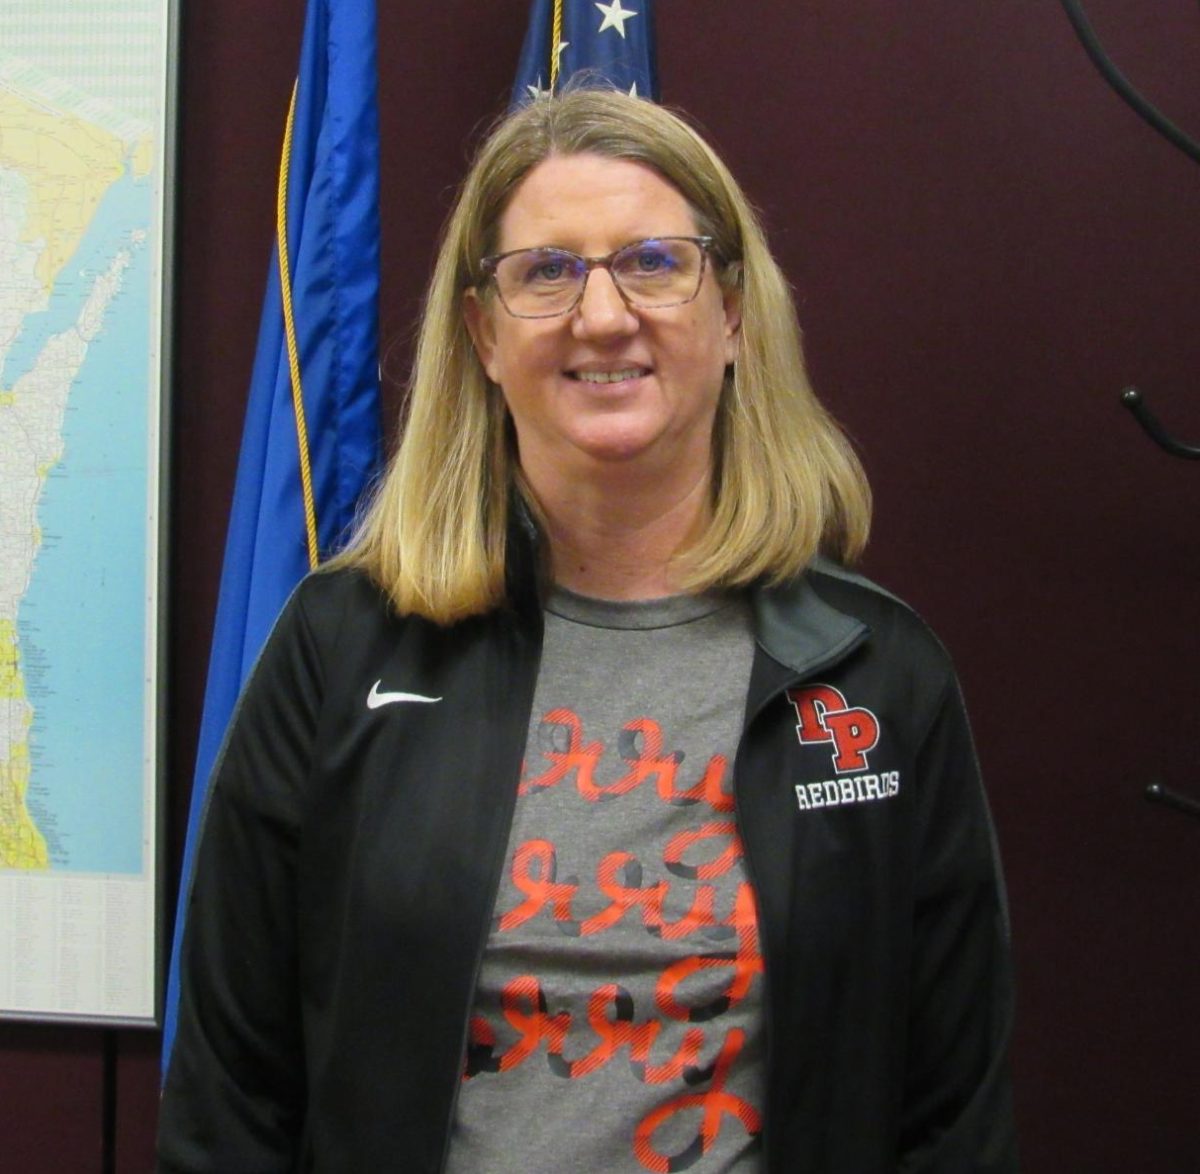 Mrs. Jeskie excited for new challenge at high school level